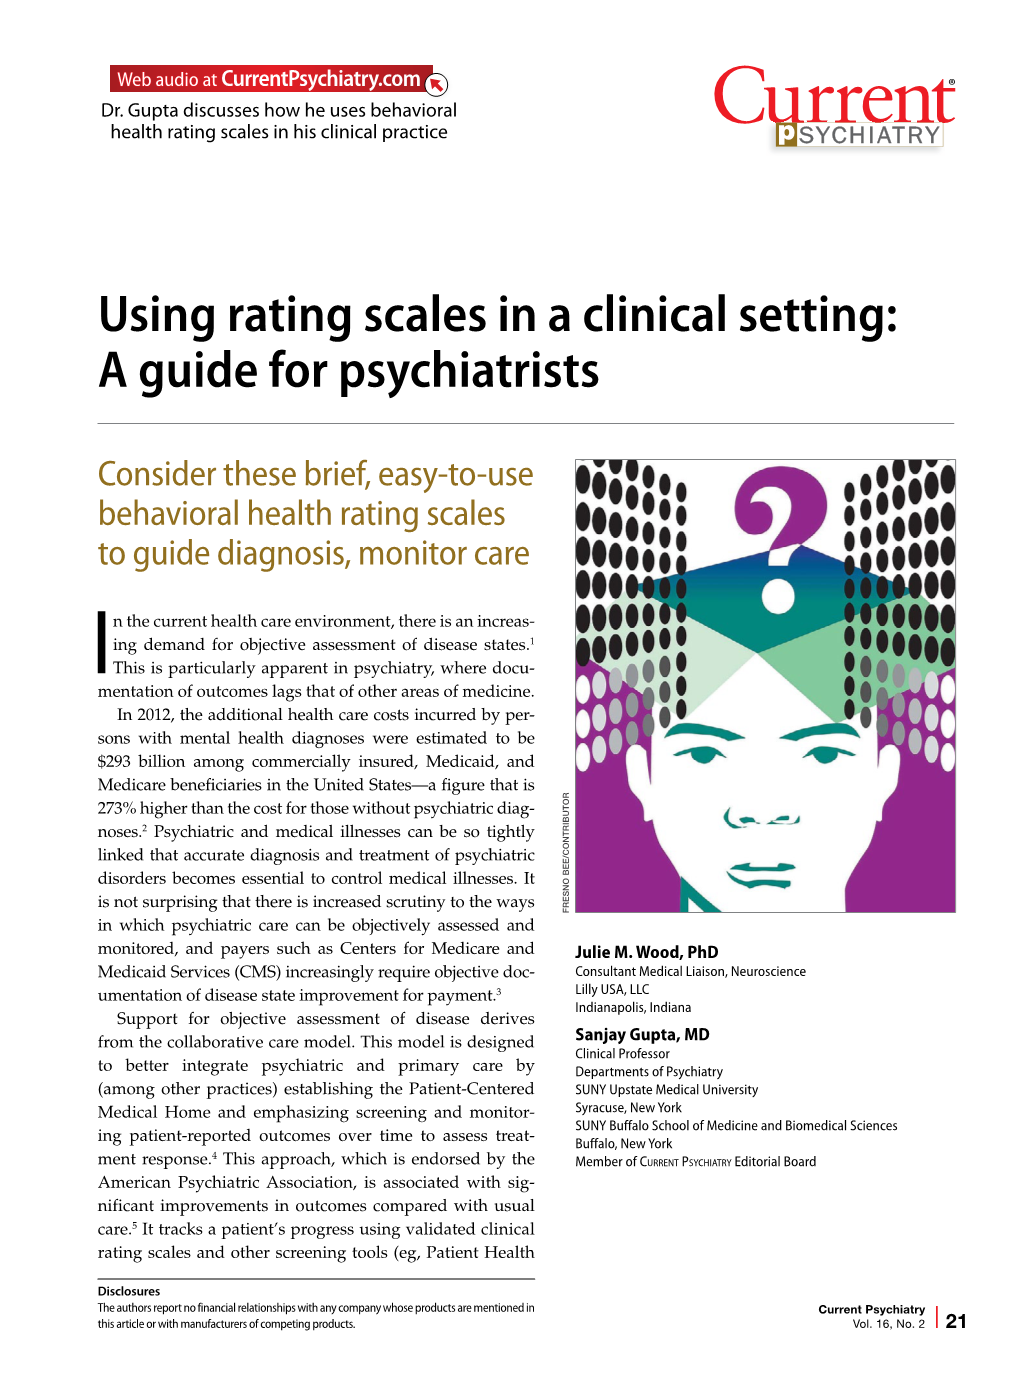 Using Rating Scales in a Clinical Setting: a Guide for Psychiatrists